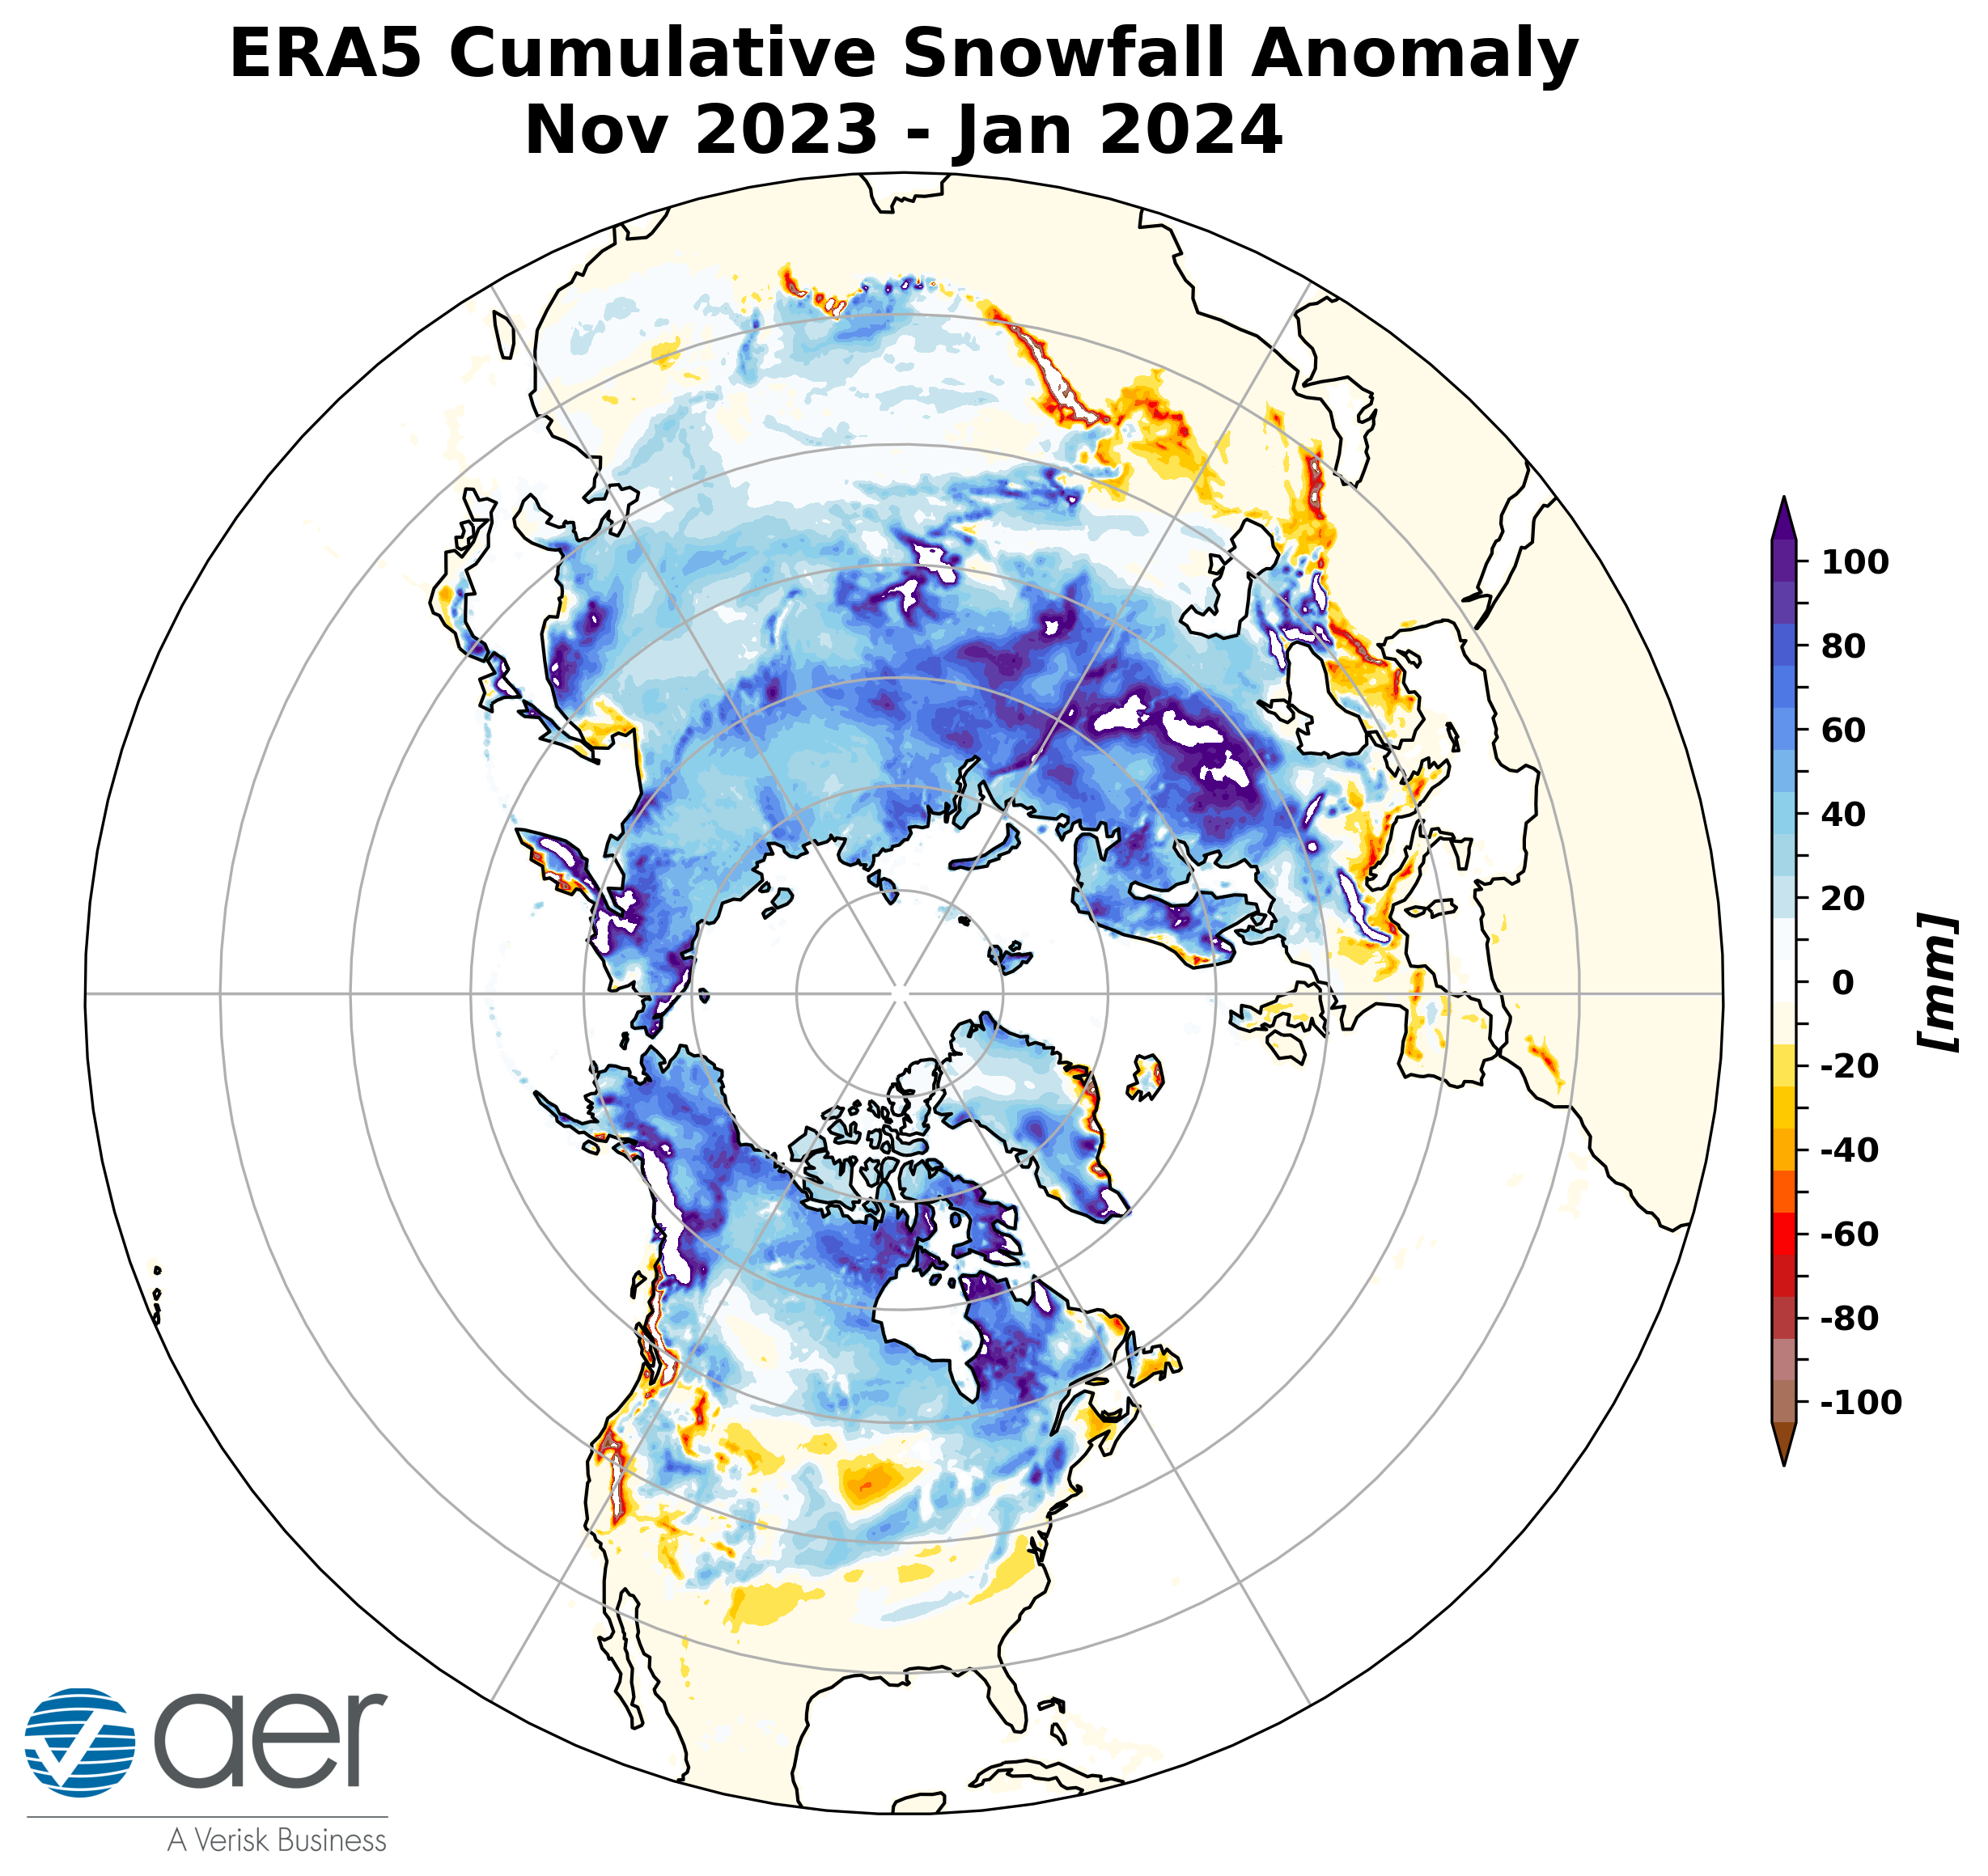 Snowfall is changing across the globe, new maps show